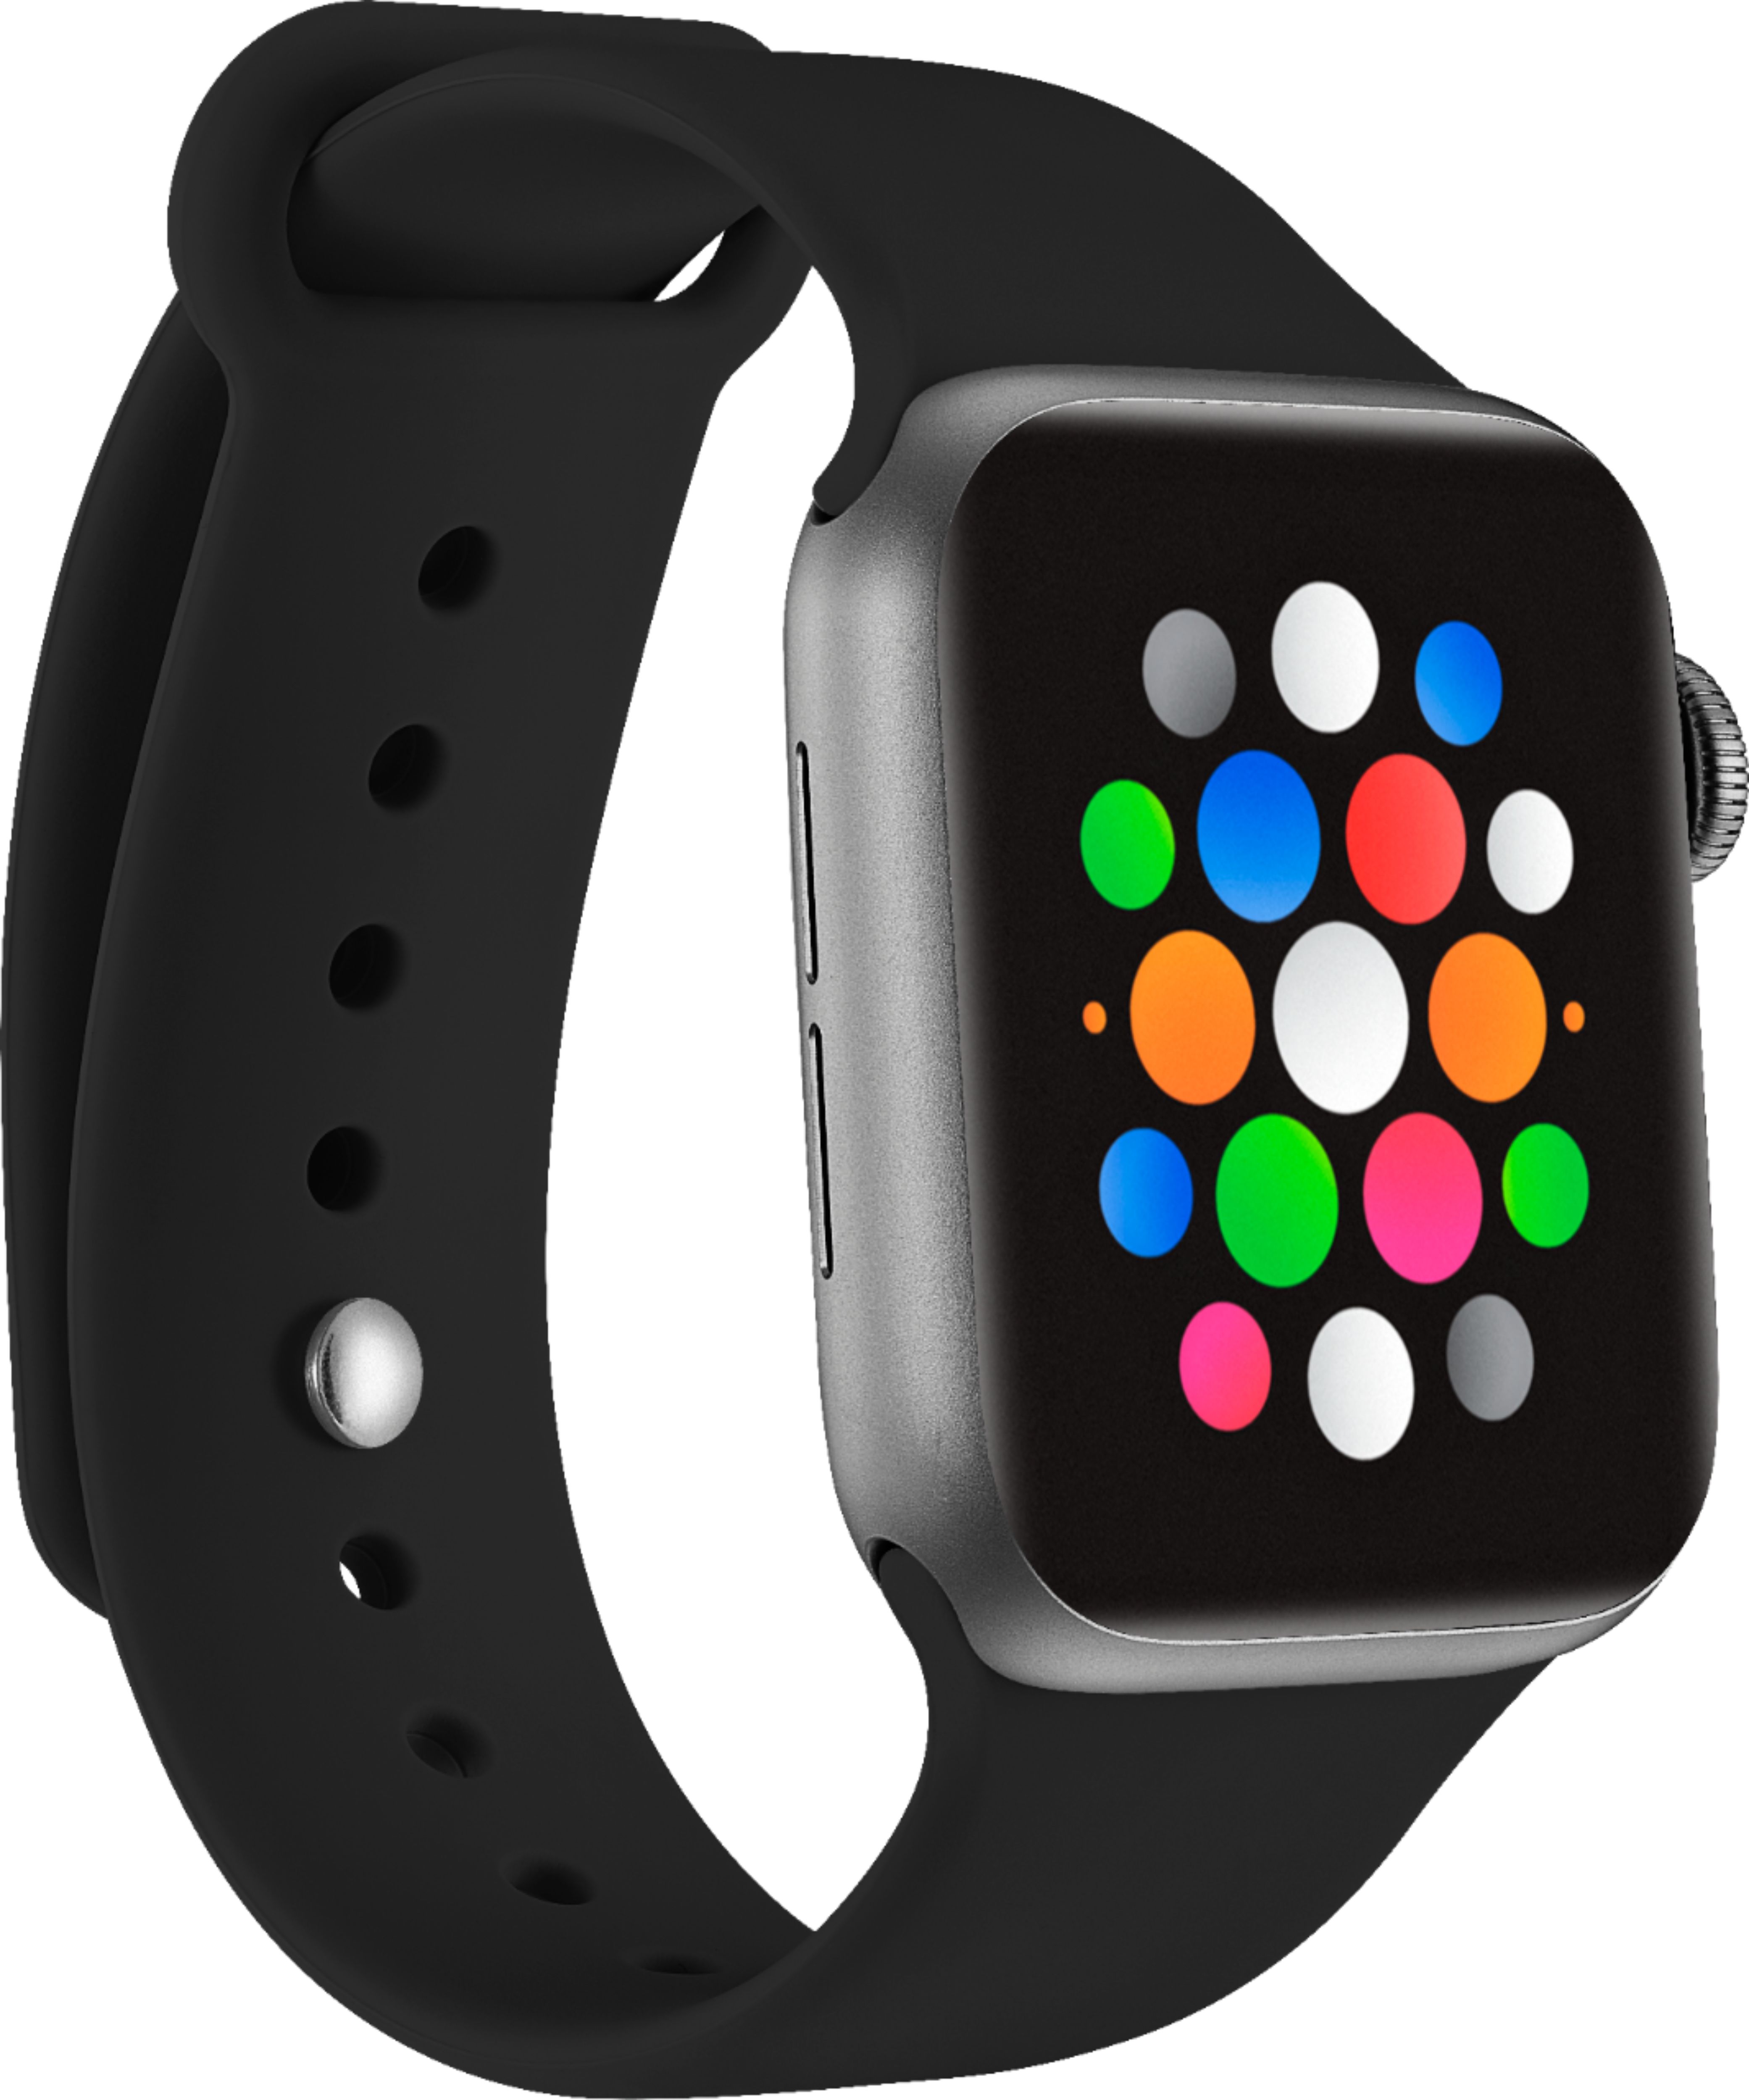 Modal™ Silicone Band for Apple Watch 38mm, 40mm, 41mm and Apple Watch Series 8 41mm Black MD-AWBSB40 Best Buy